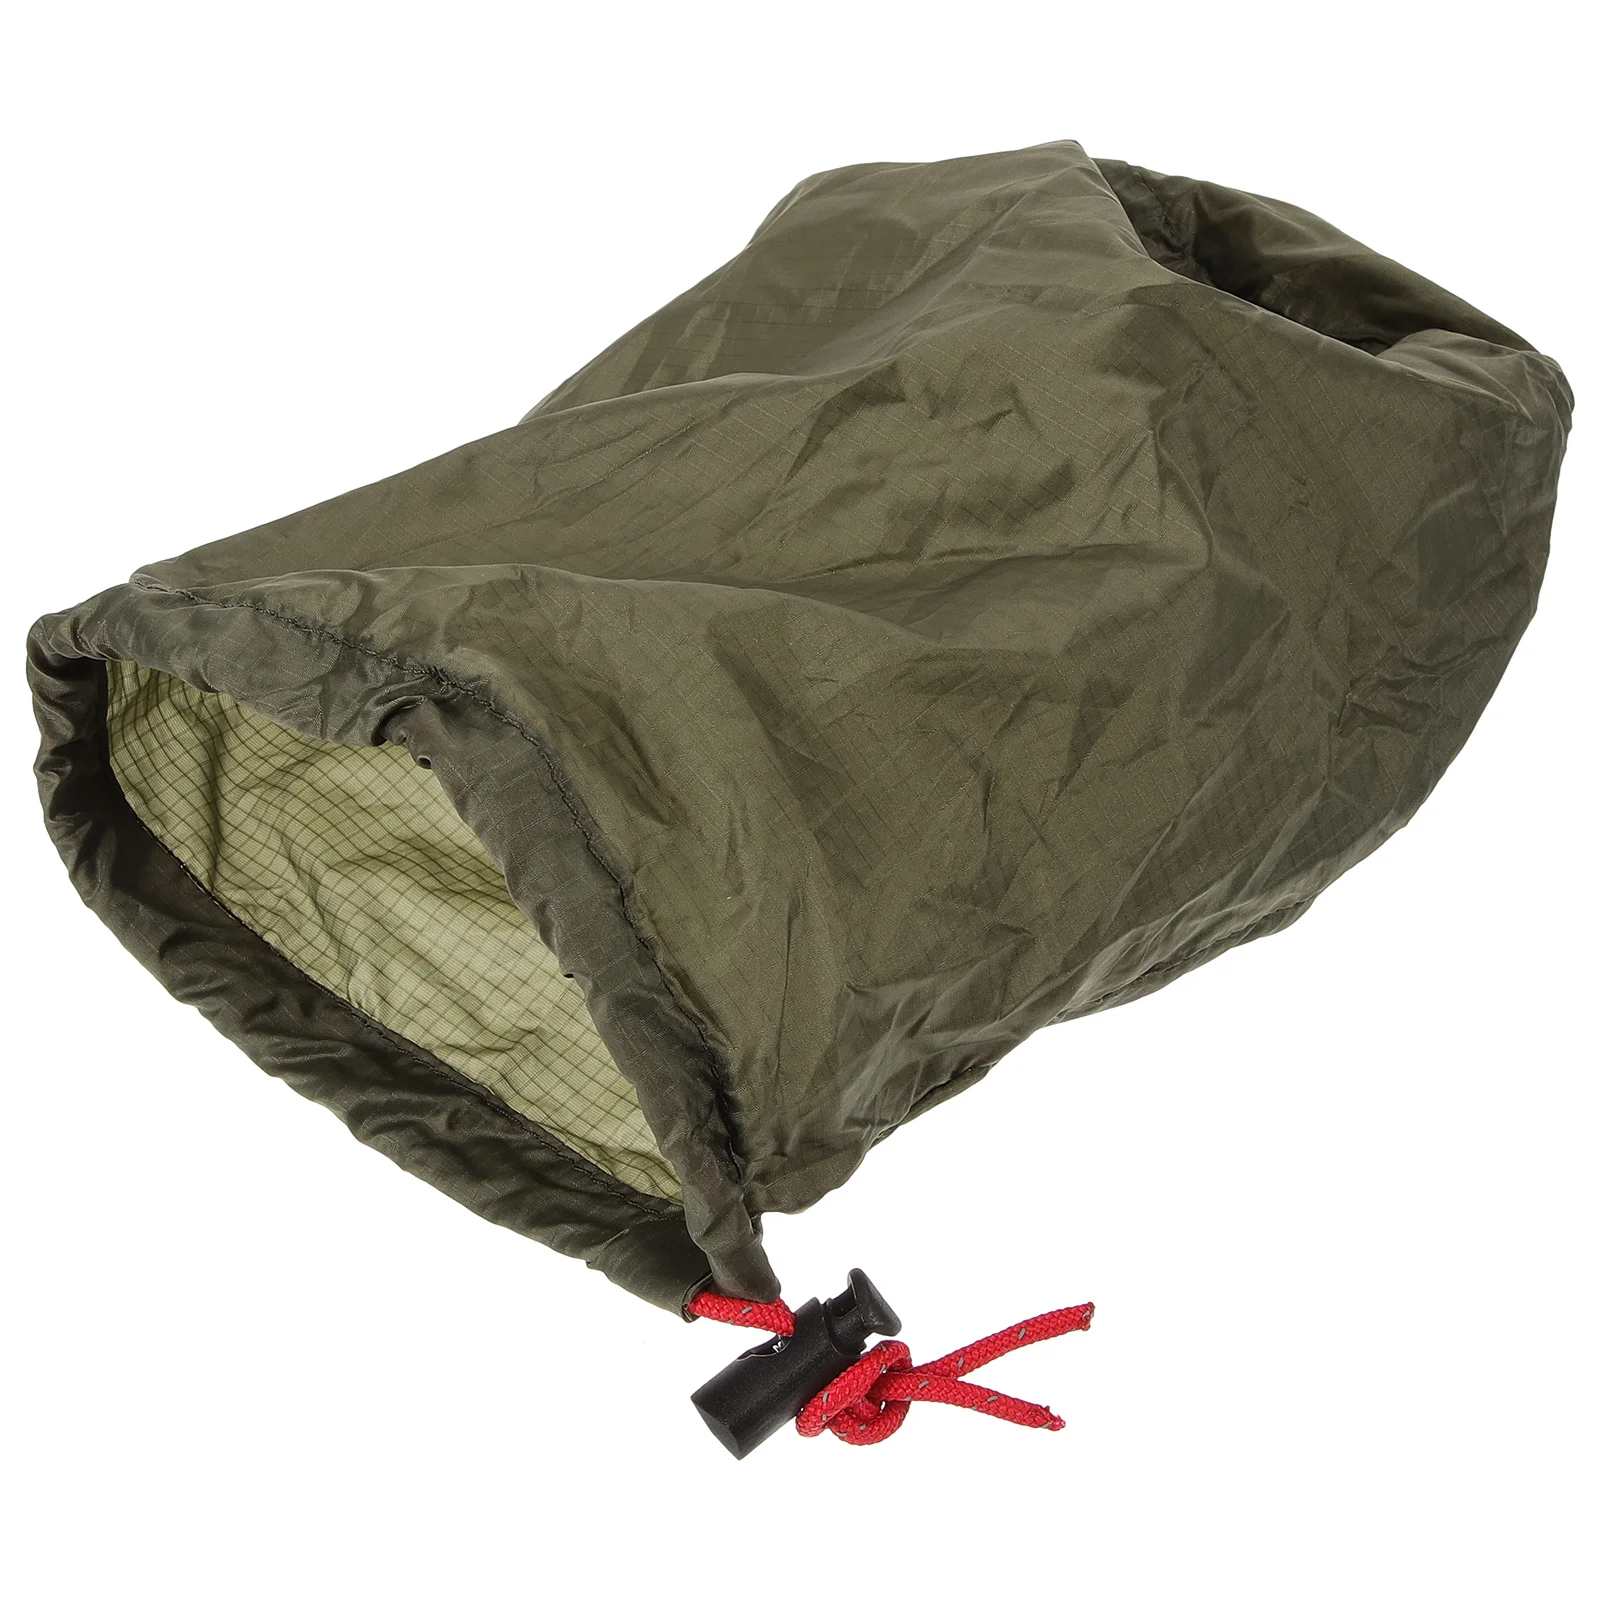 

Clothes Storage Bag Travel Bag for Moving House Camping Organizer Shoes Clothes Storage Bag CampingHiking Outdoor Equipment